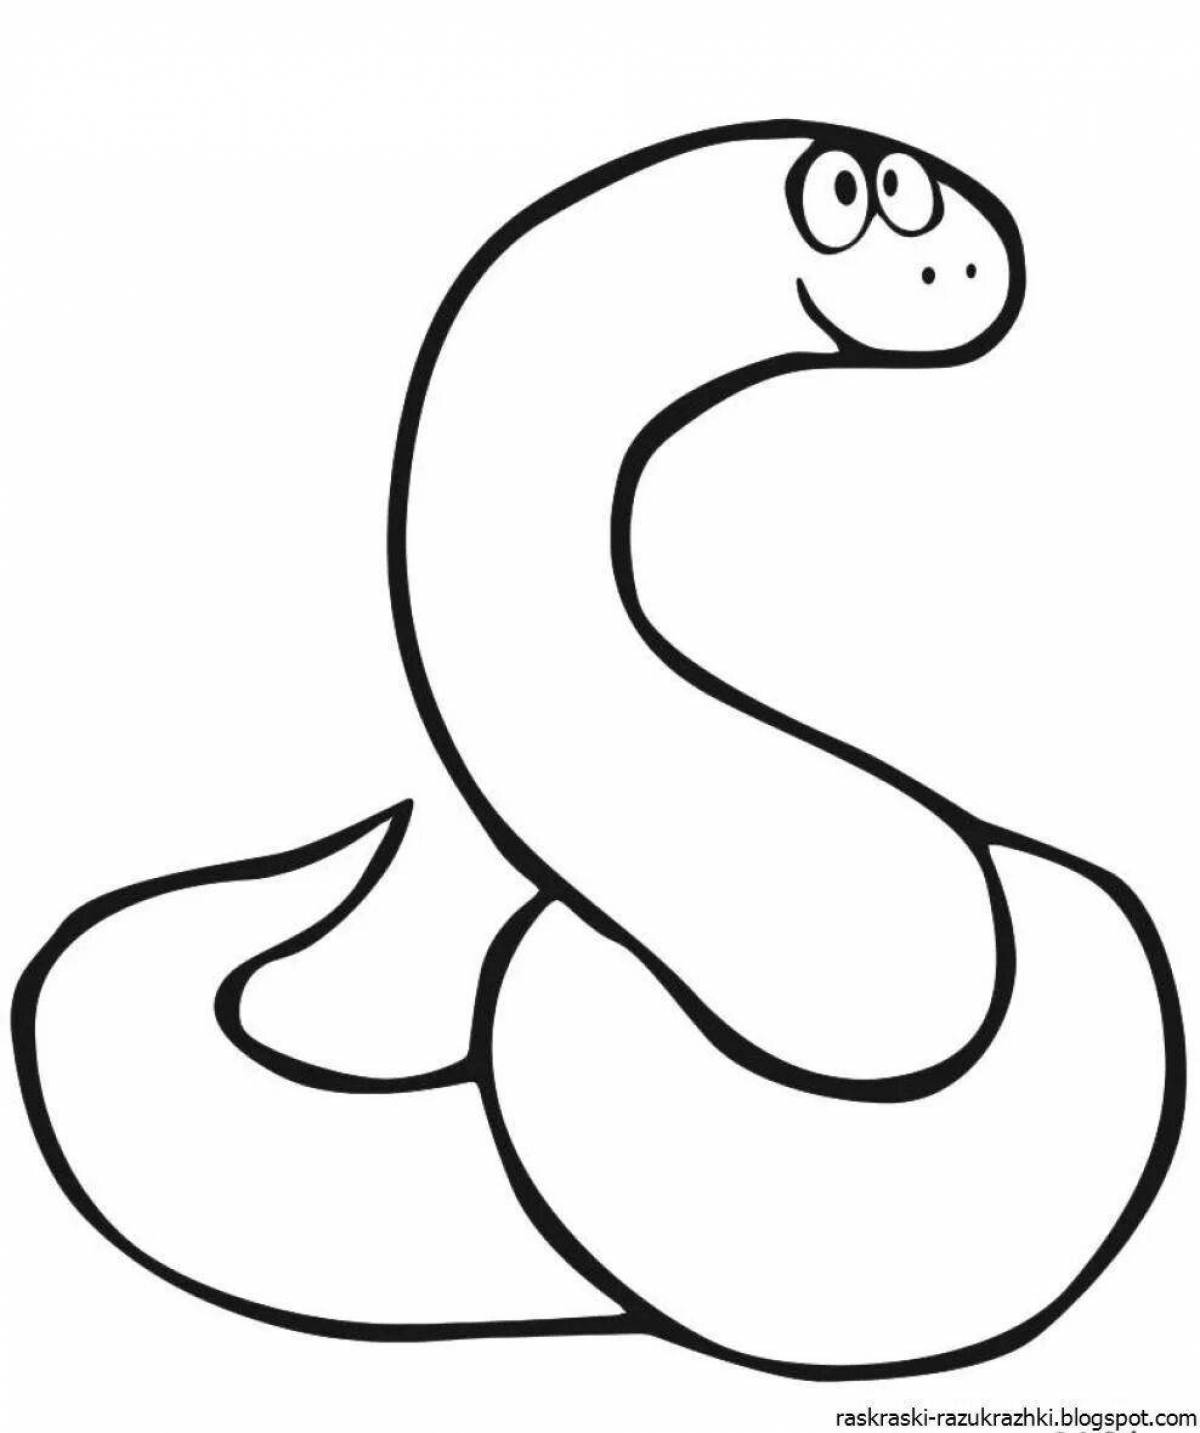 Colorful snake coloring page for 3-4 year olds